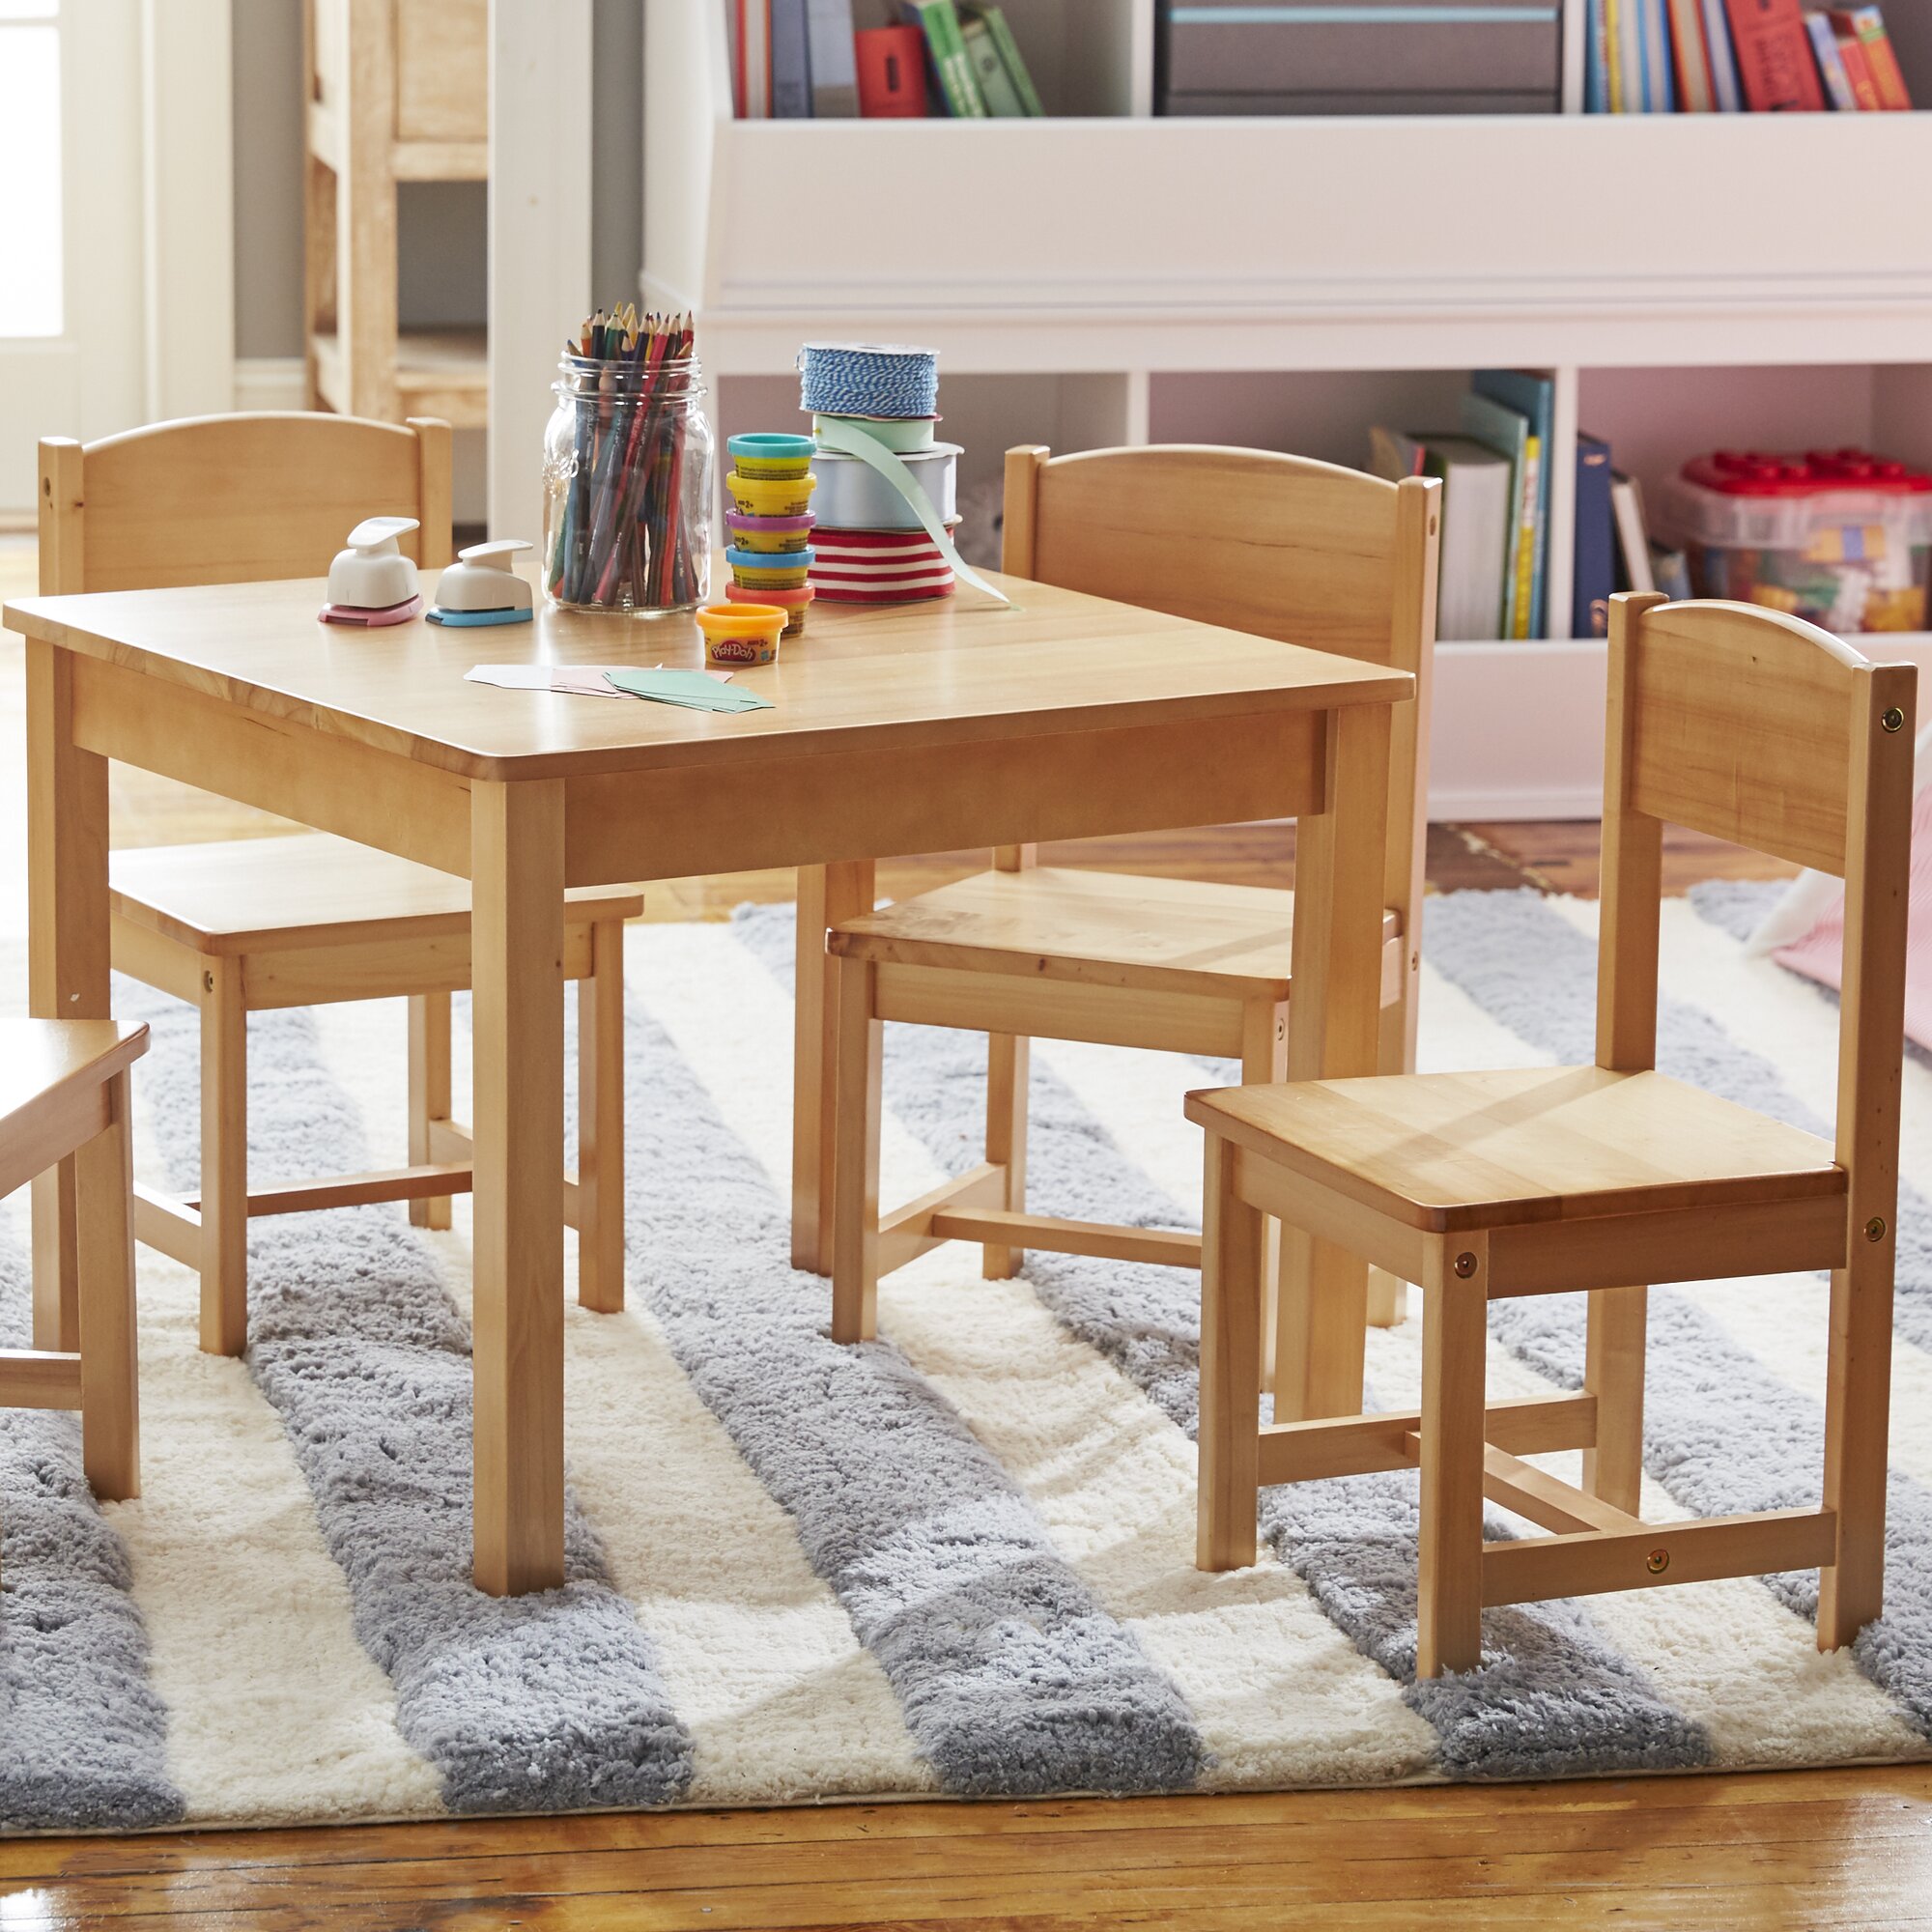 Farmhouse Kids 5 Piece Square Table And Chair Set 